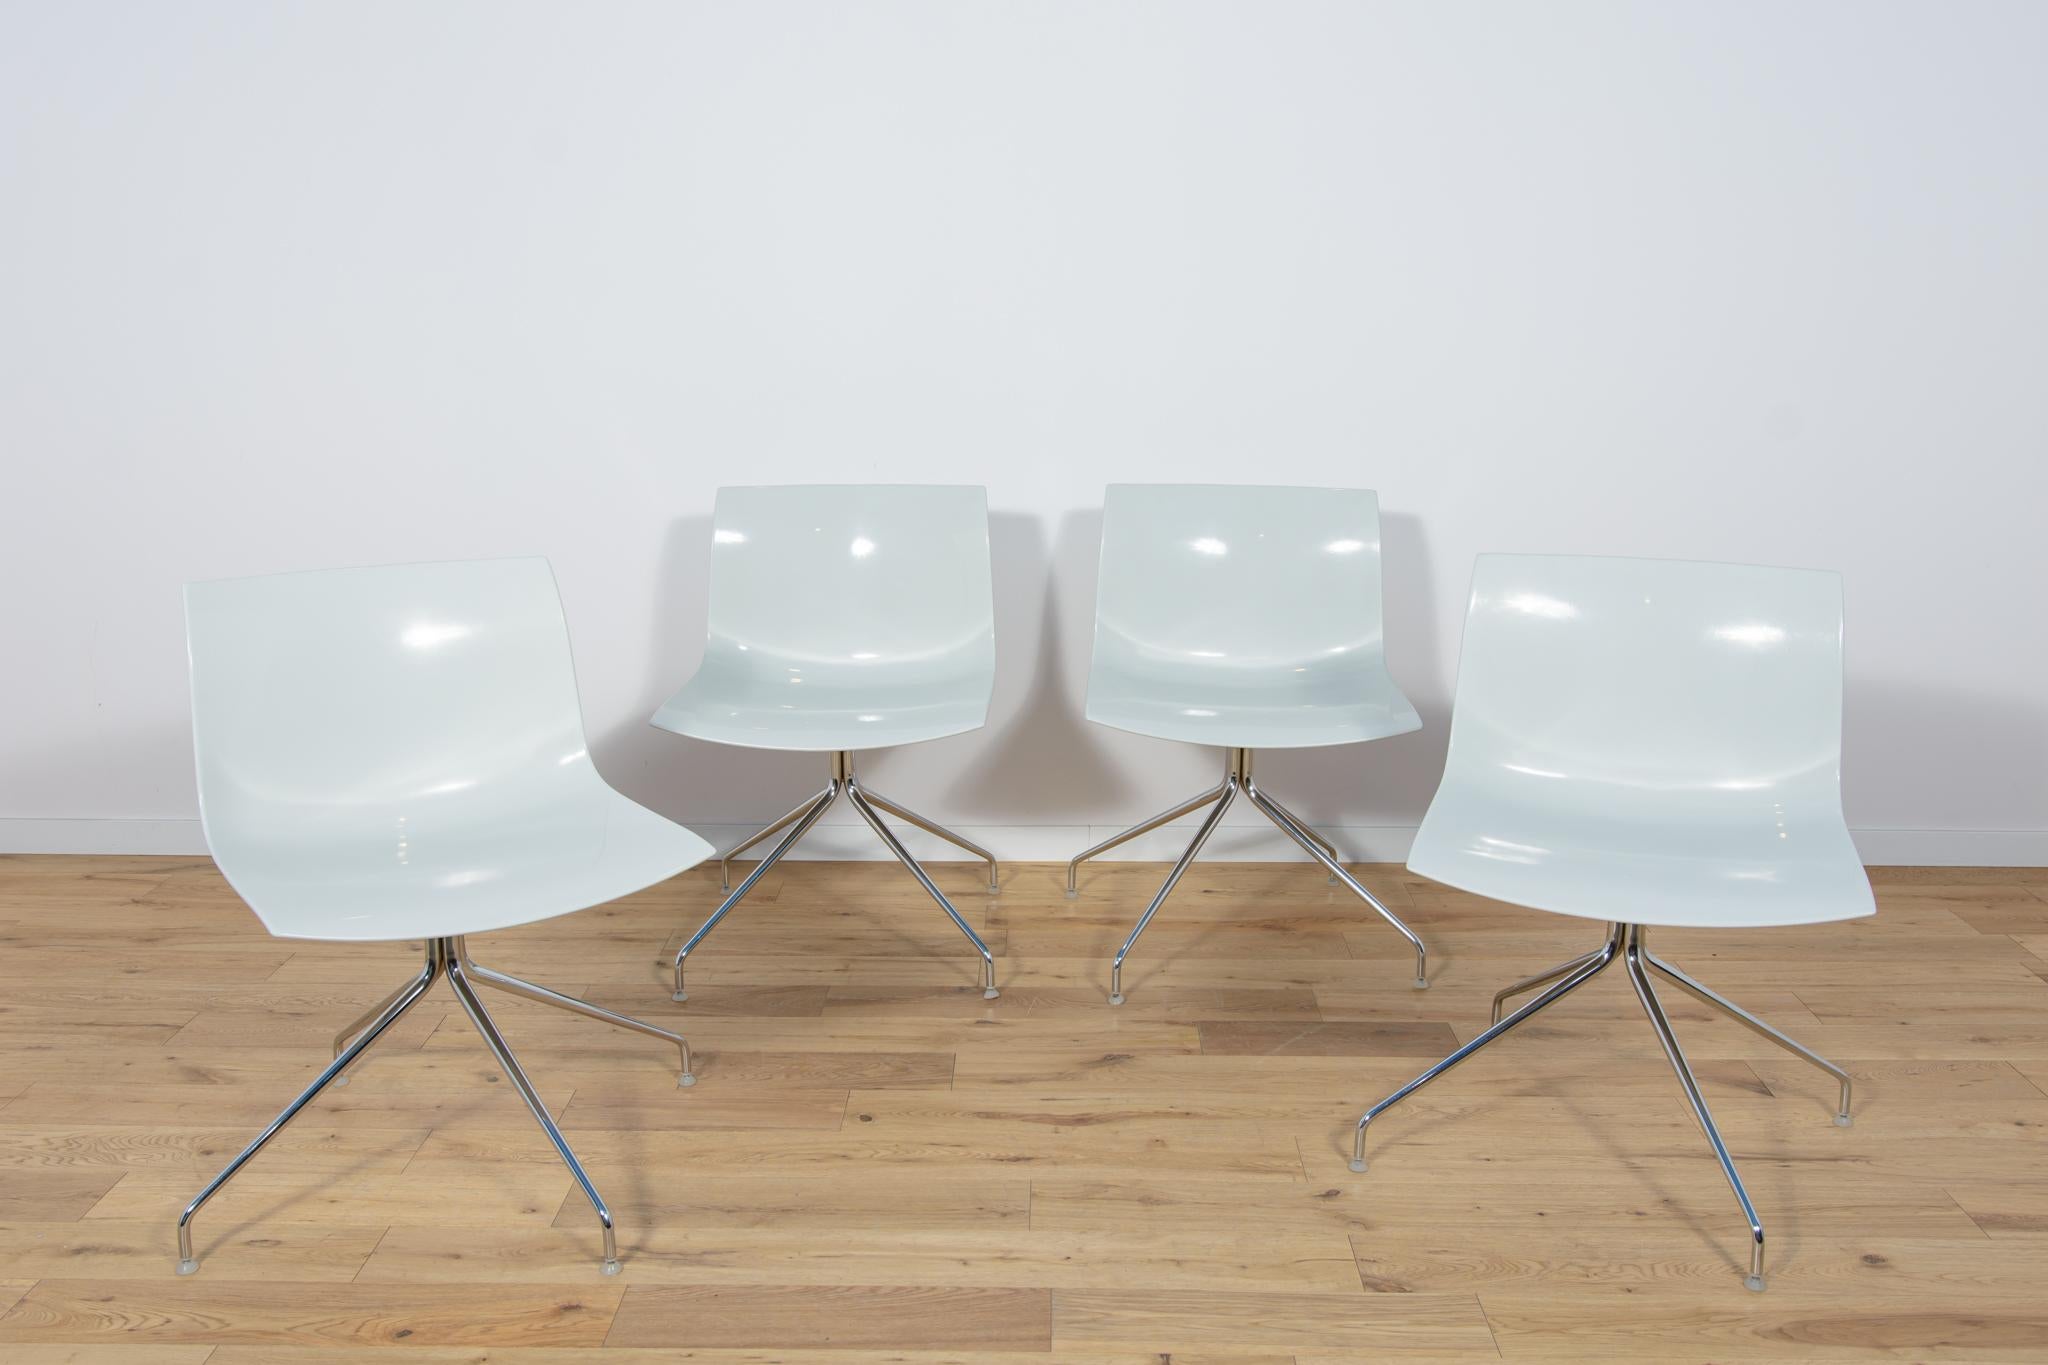 Steel Catifa 53 Desk Chairs by Lievore Altherr Molina for Arper, 2000s, Set of 4 For Sale